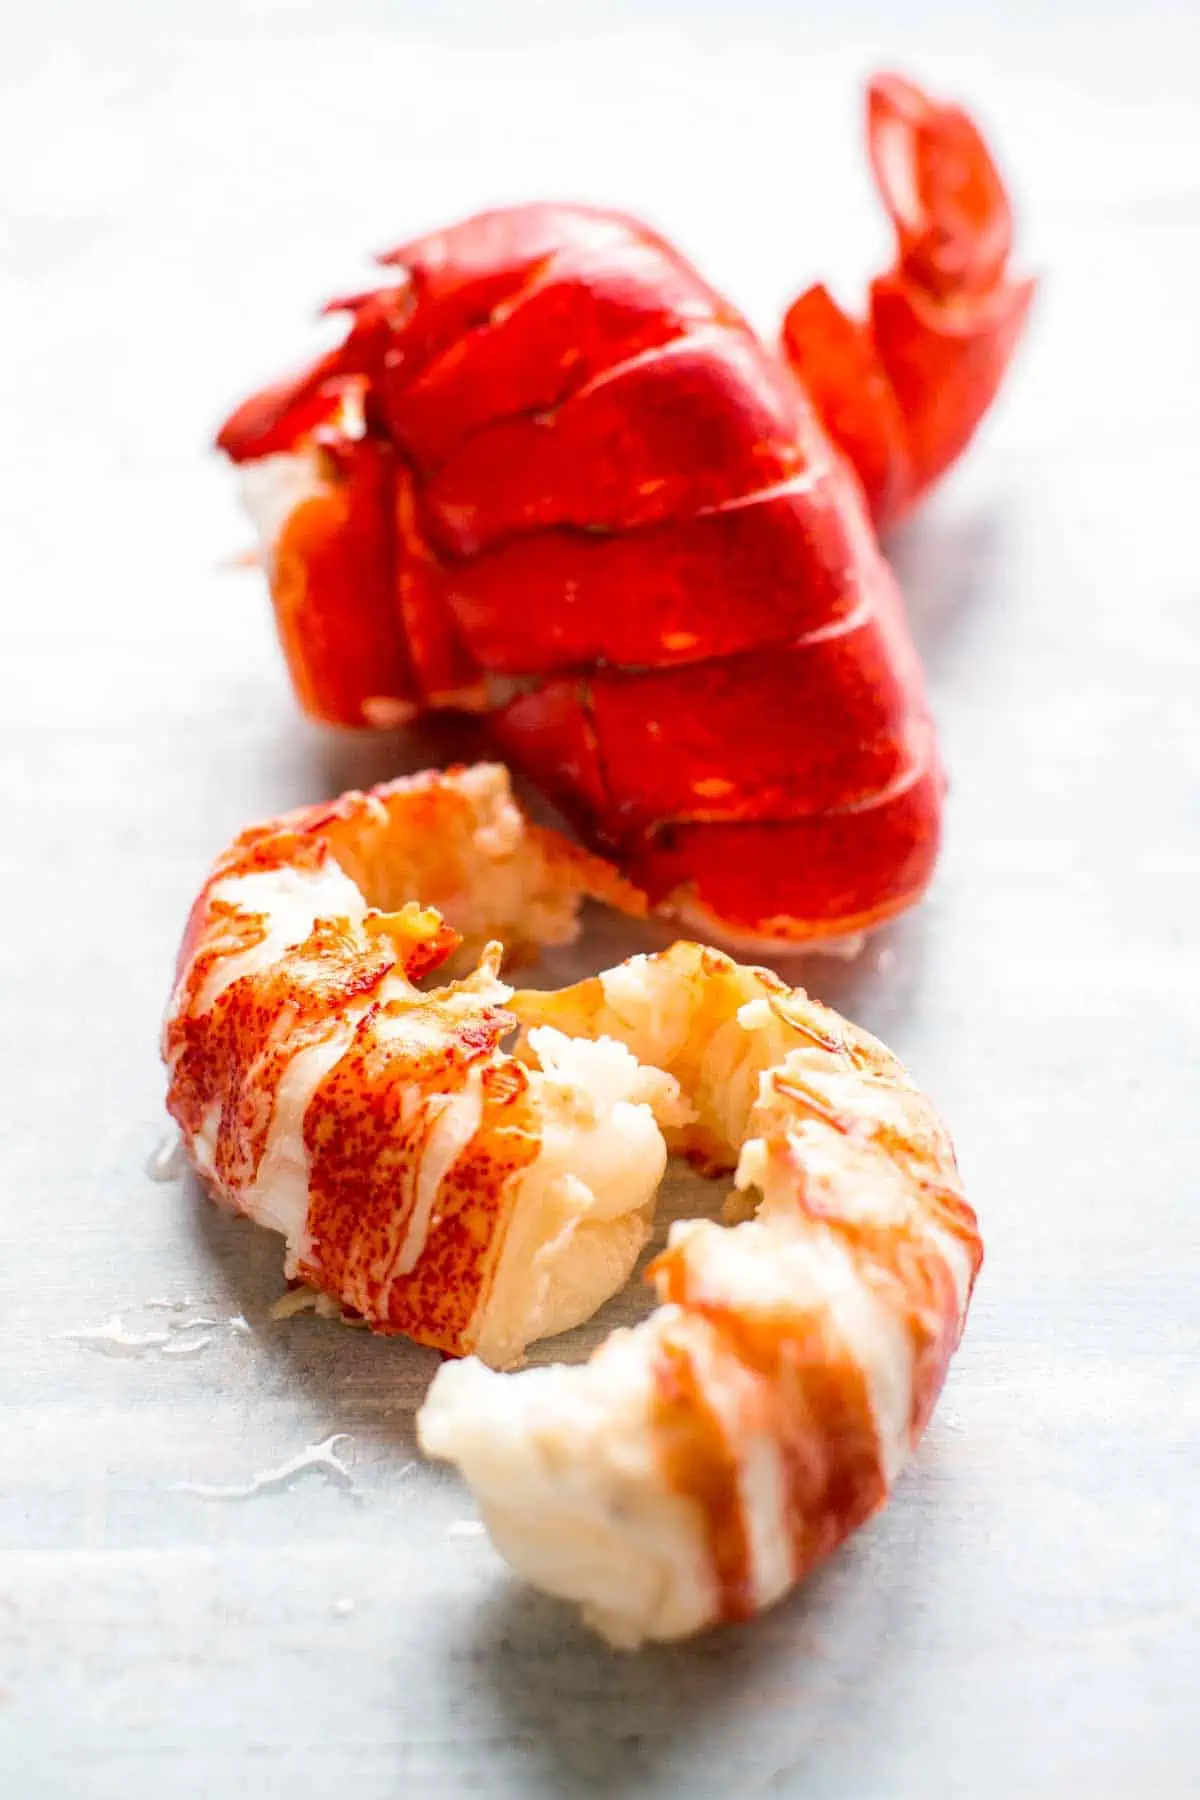 The meat from two lobster tails with the shells behind them.